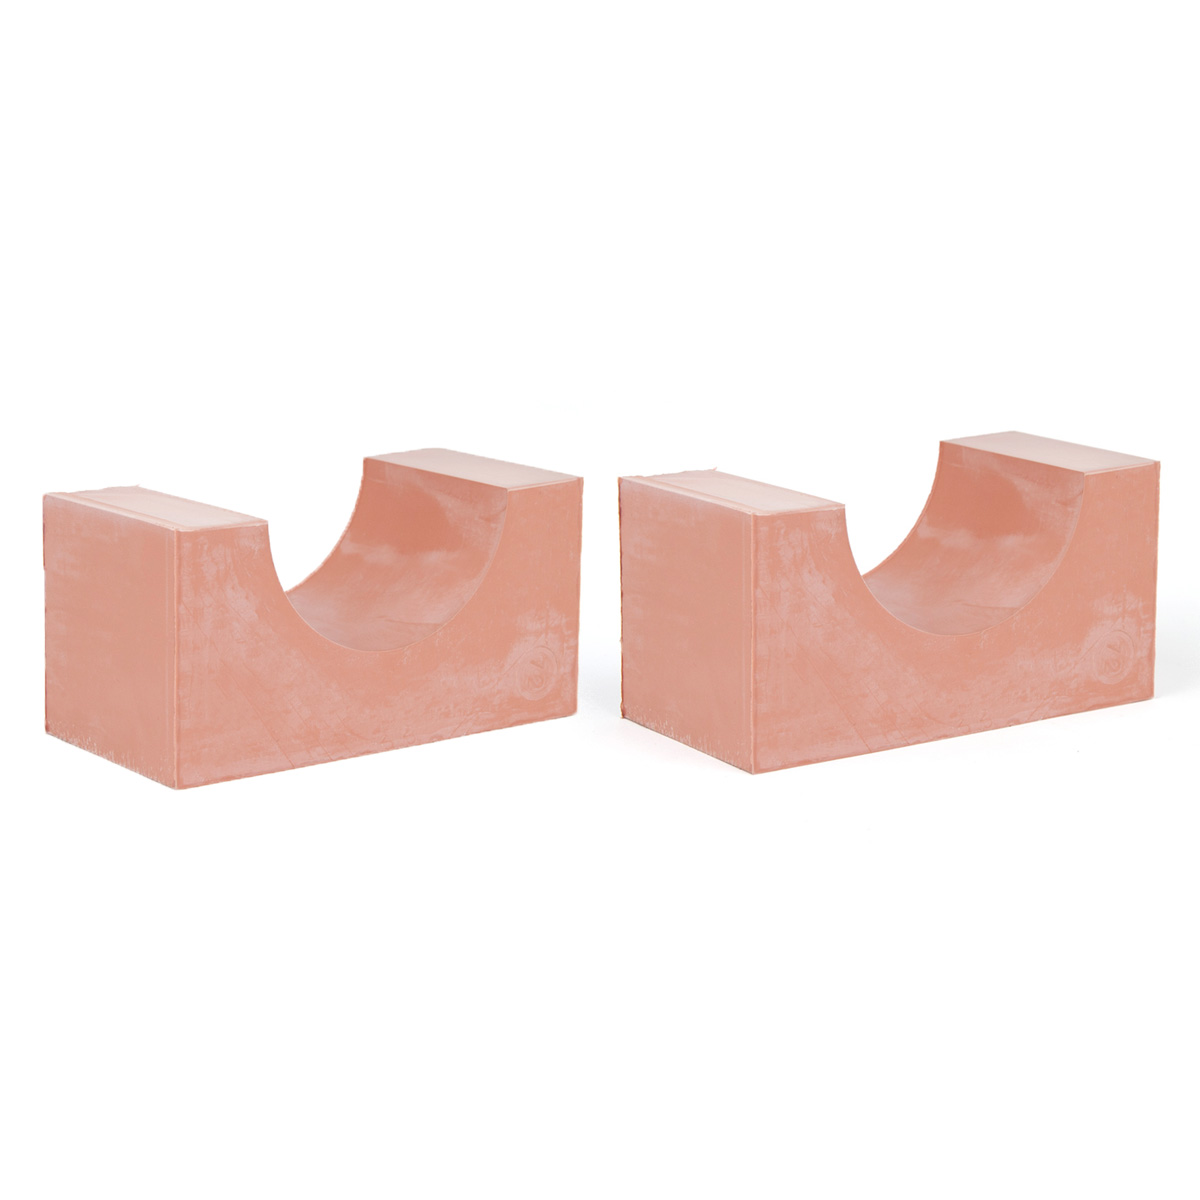 120-72*2 Set of 2 half insert block lycron, 120-72 for cable/pipe diam. 71.5-73.5mm